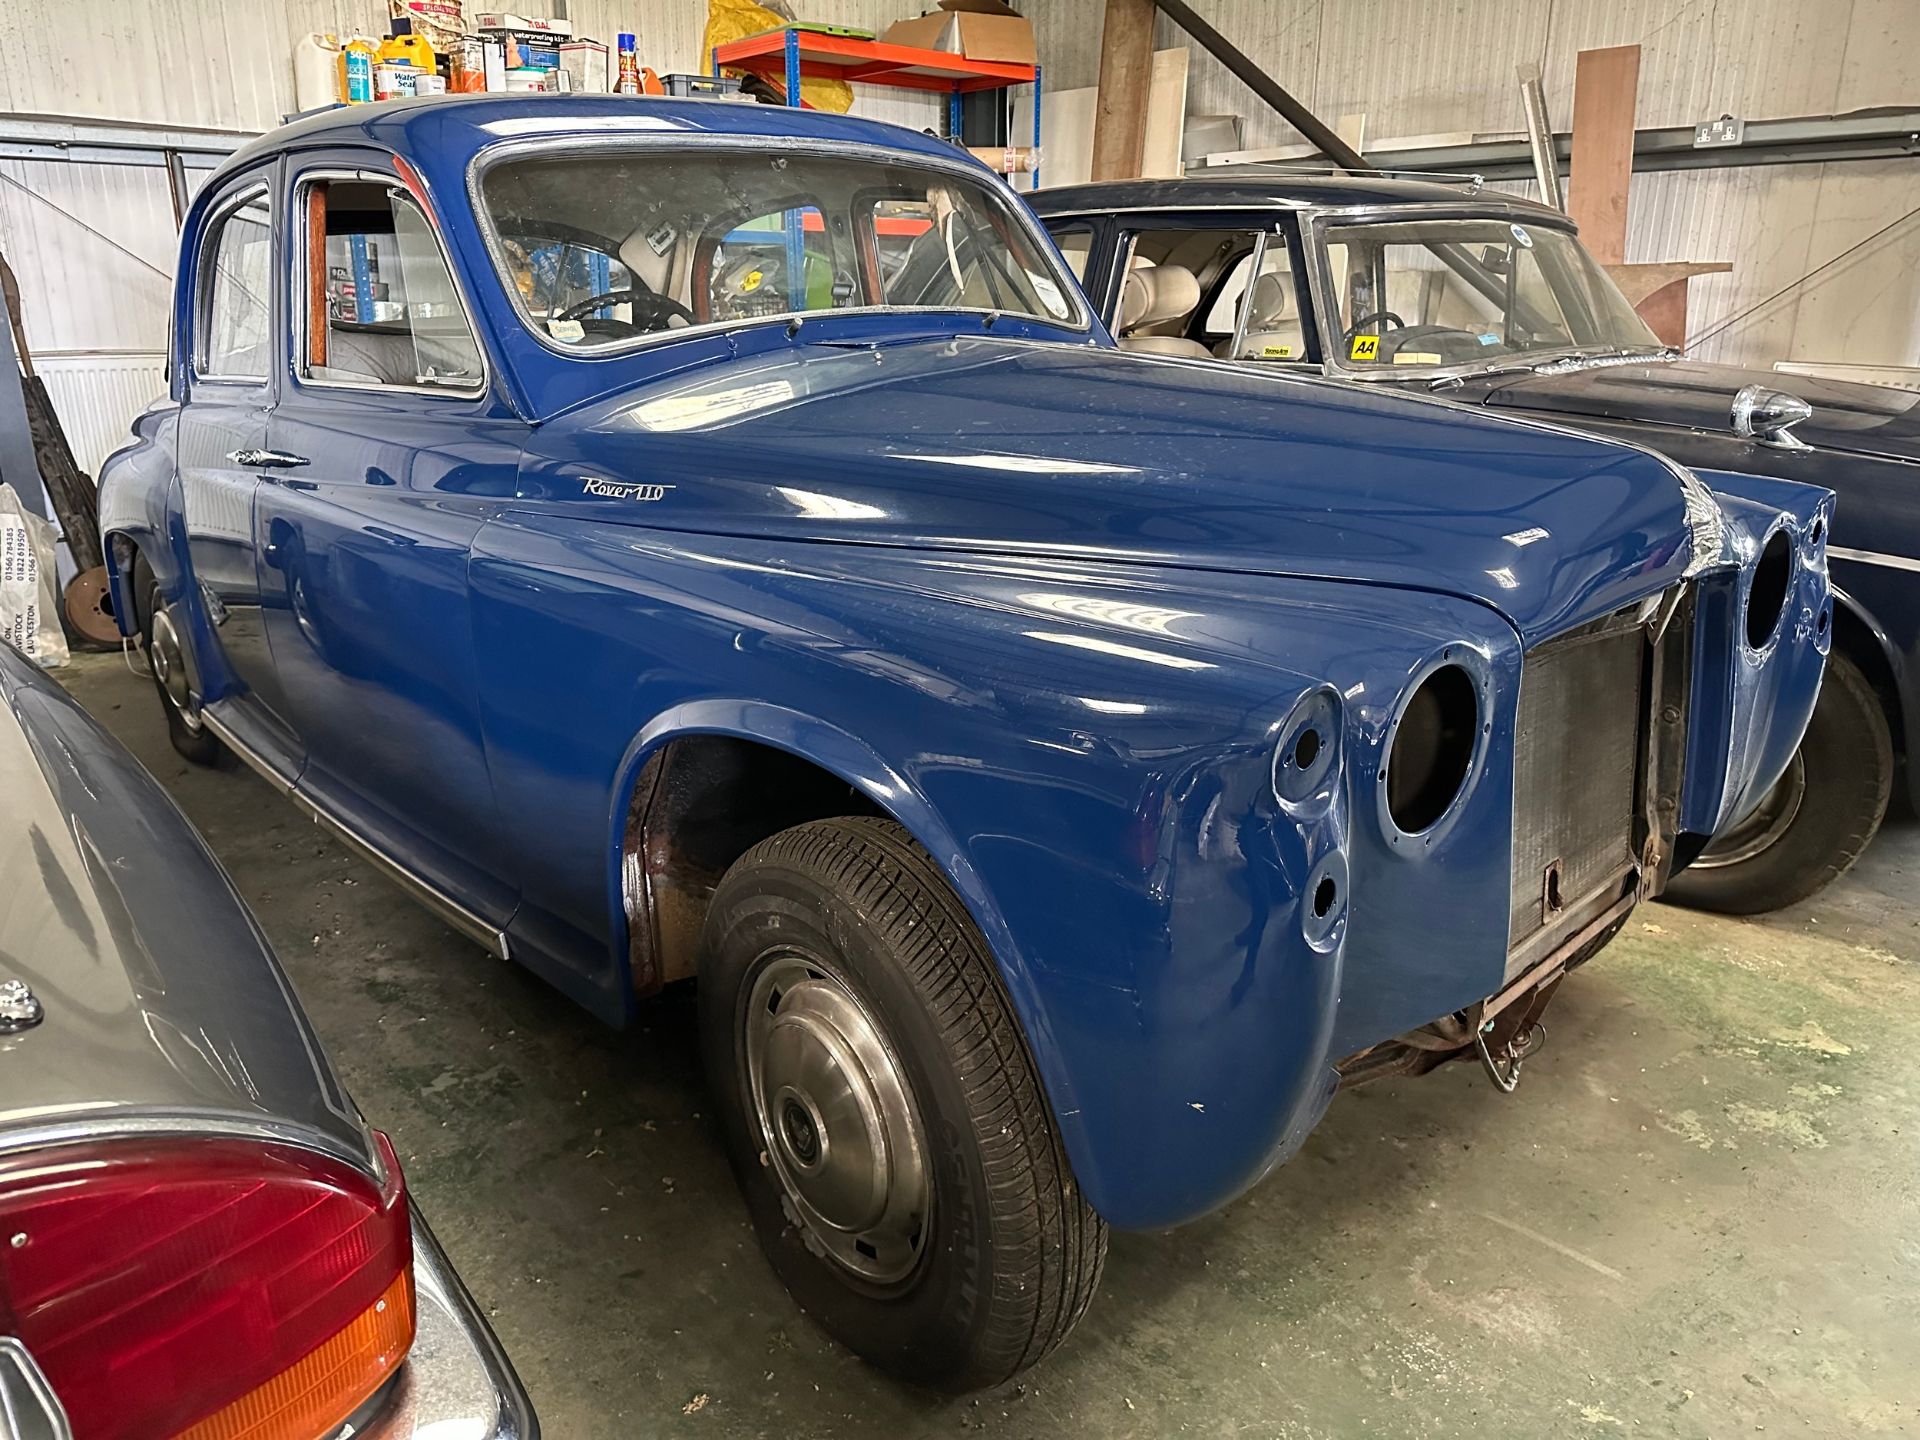 1962 Rover 110 Being sold without reserve Registration number 417 MUO Chassis number 765002299 - Image 30 of 35